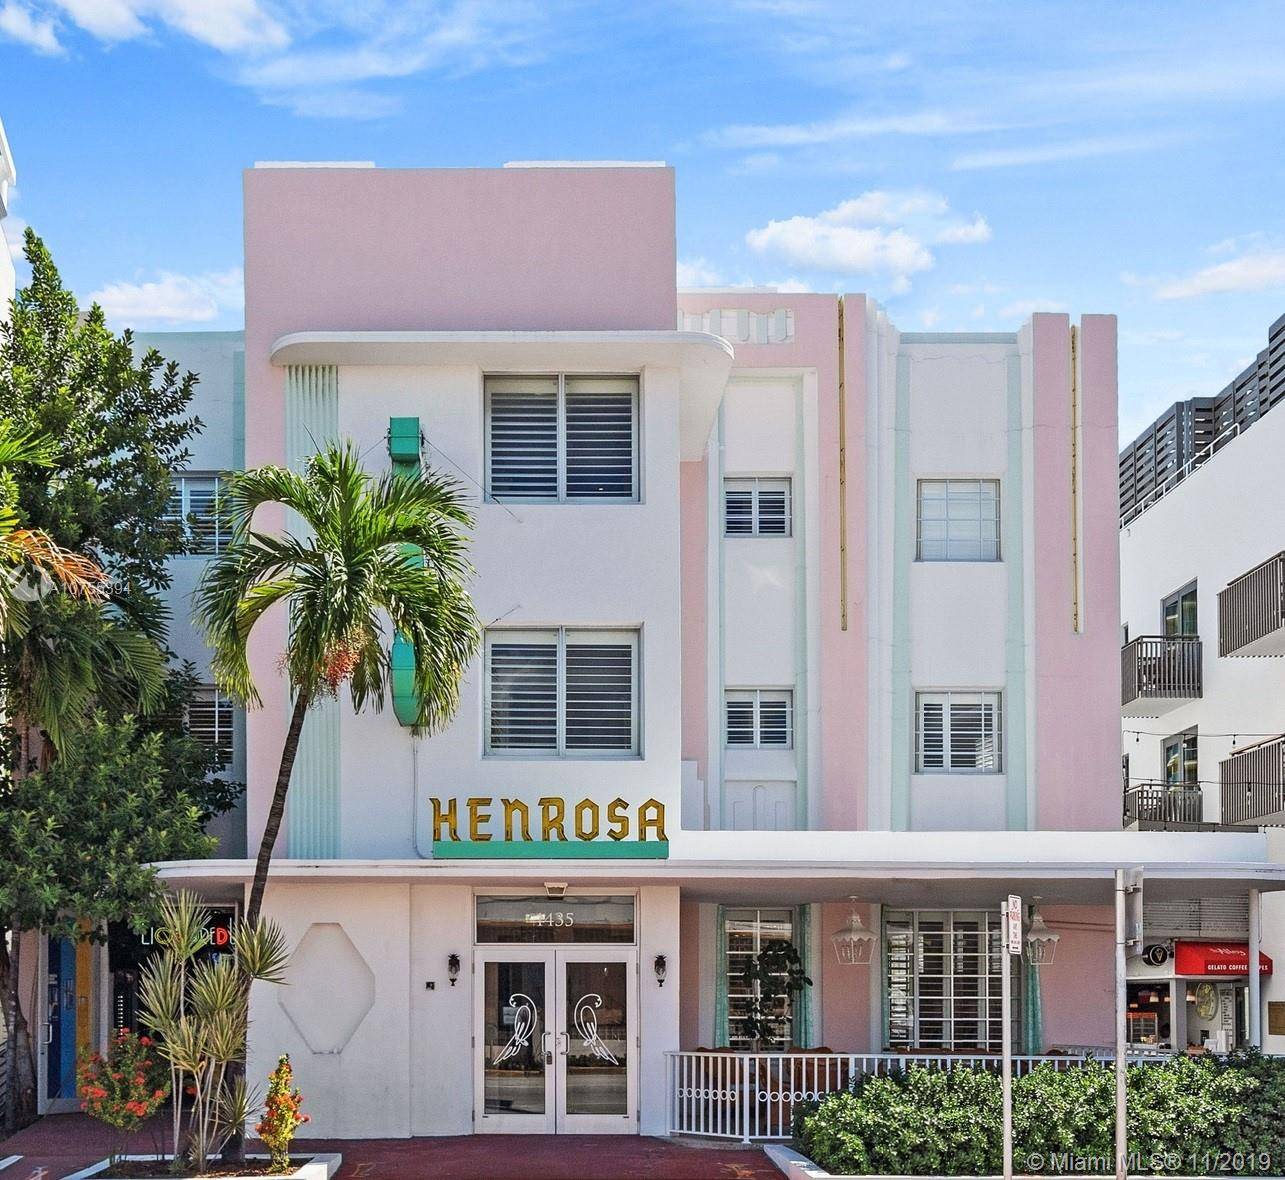 Just steps from Ocean Drive and in the heart of South Beach, this classic 40 room hotel reopened in 2018 after careful restoration and beautifully renovated to recapture the grandeur ...